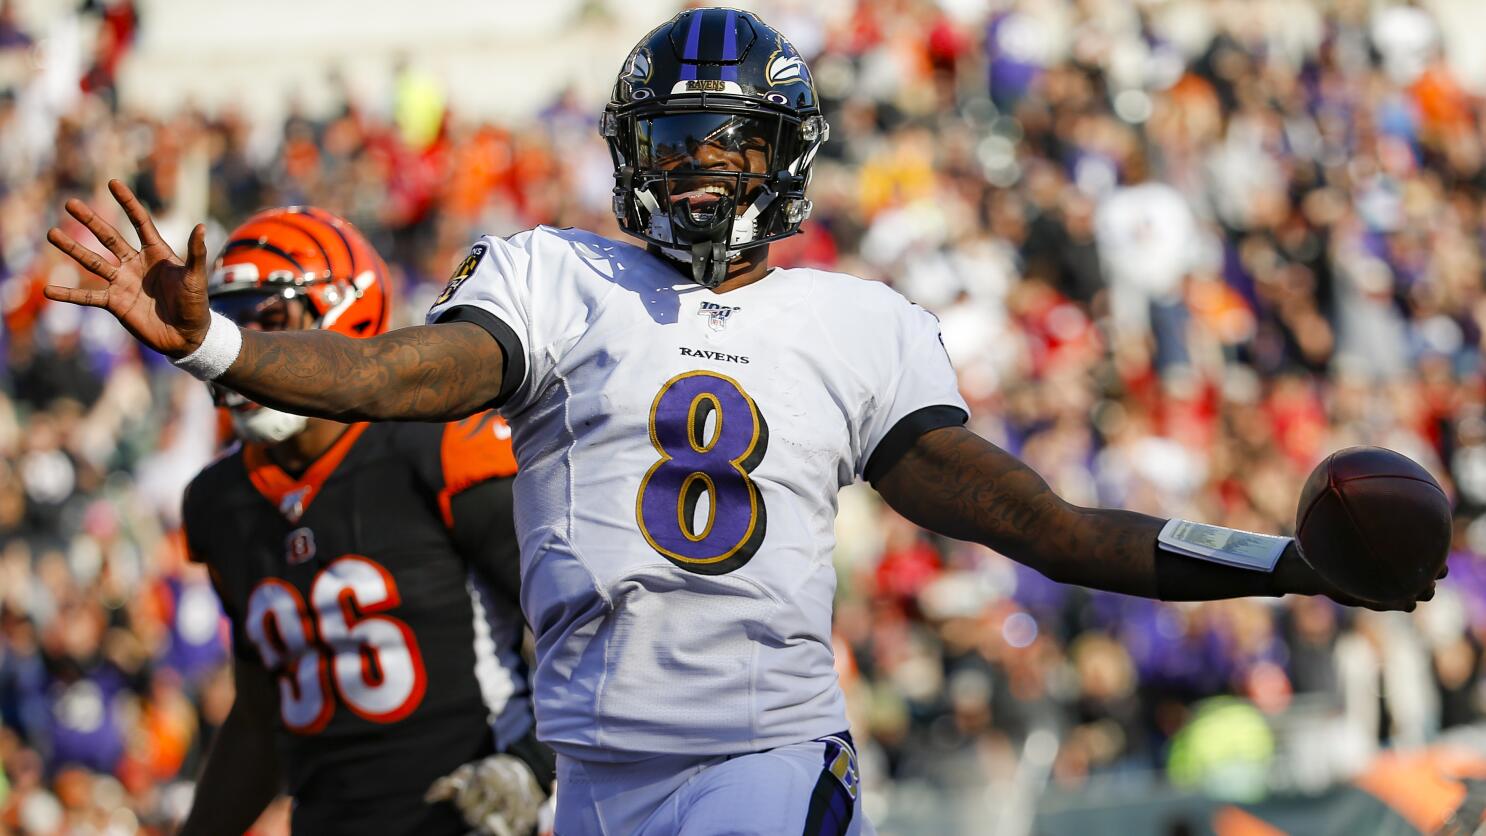 Off the field, Ravens' QB Lamar Jackson is one of Baltimore's most